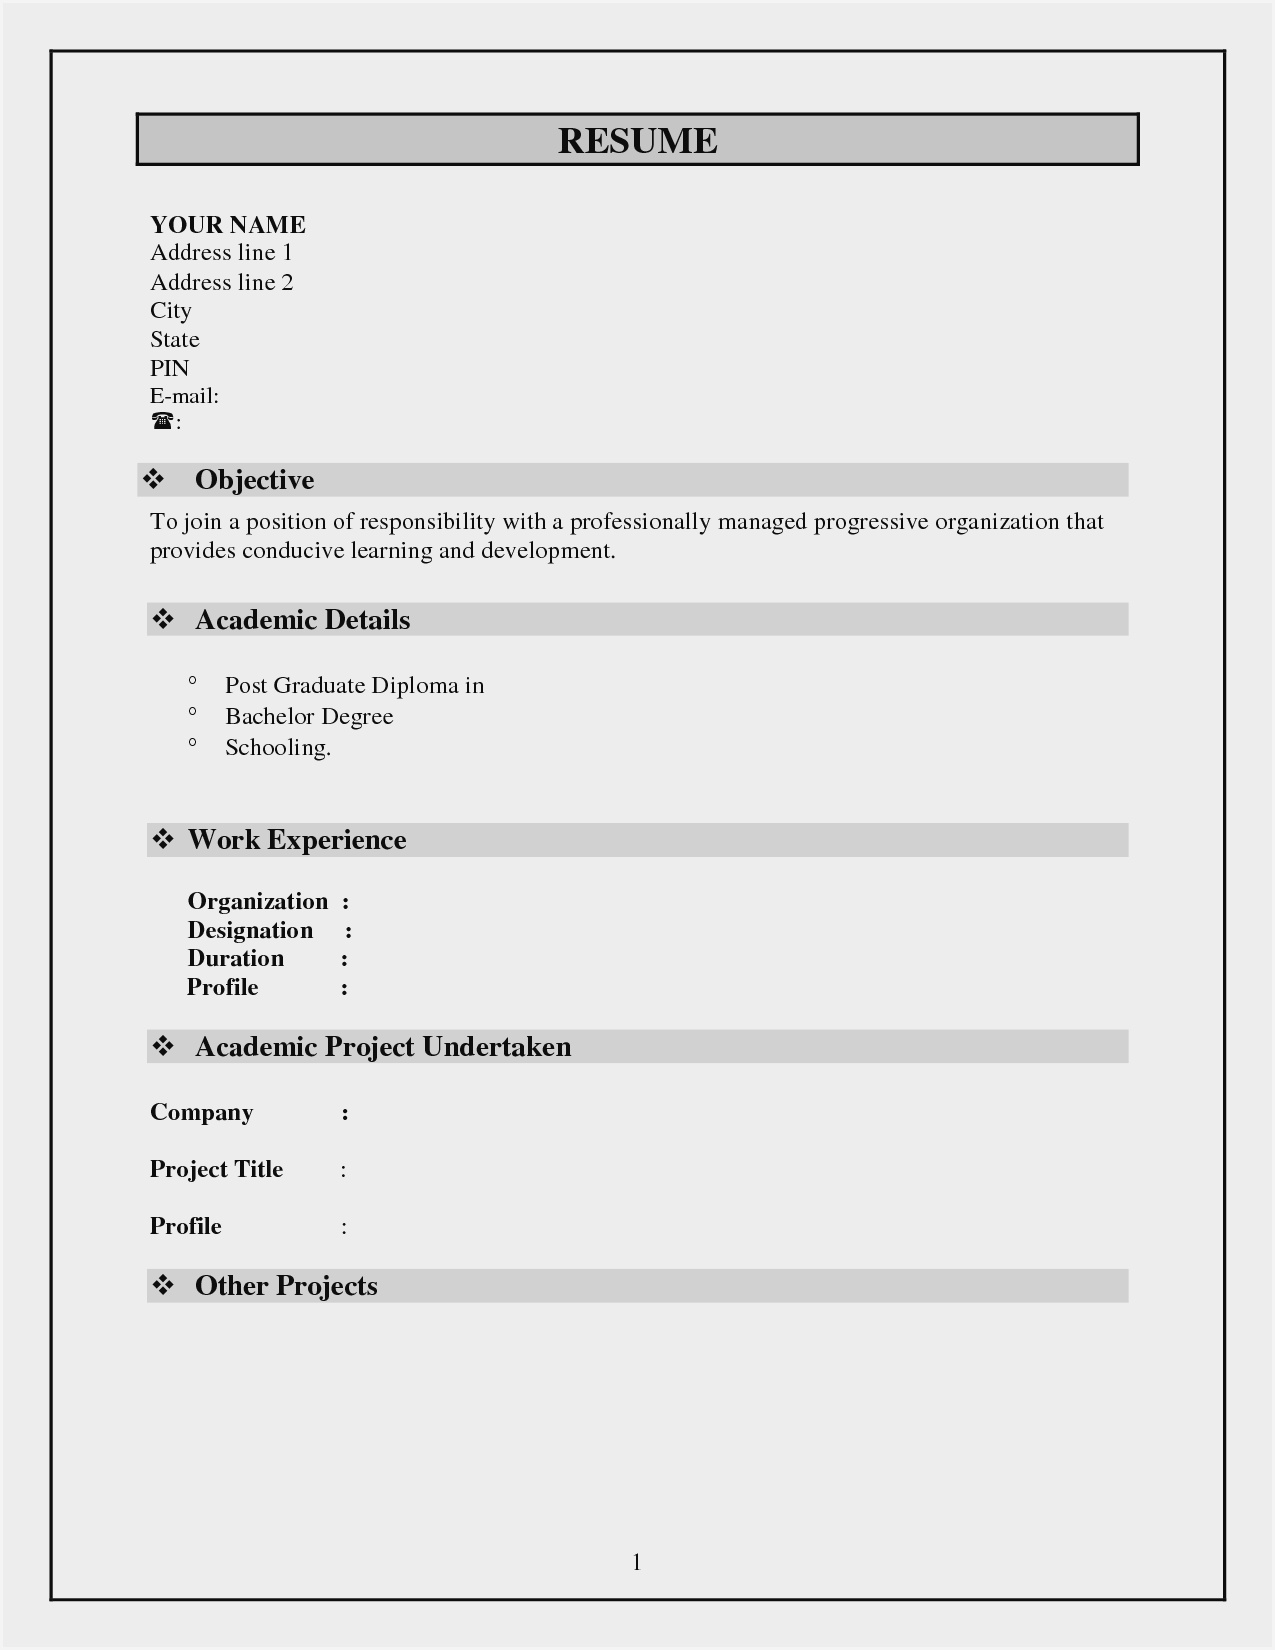 Resume Template Word Download Malaysia – Resume Sample In Job Application Template Word